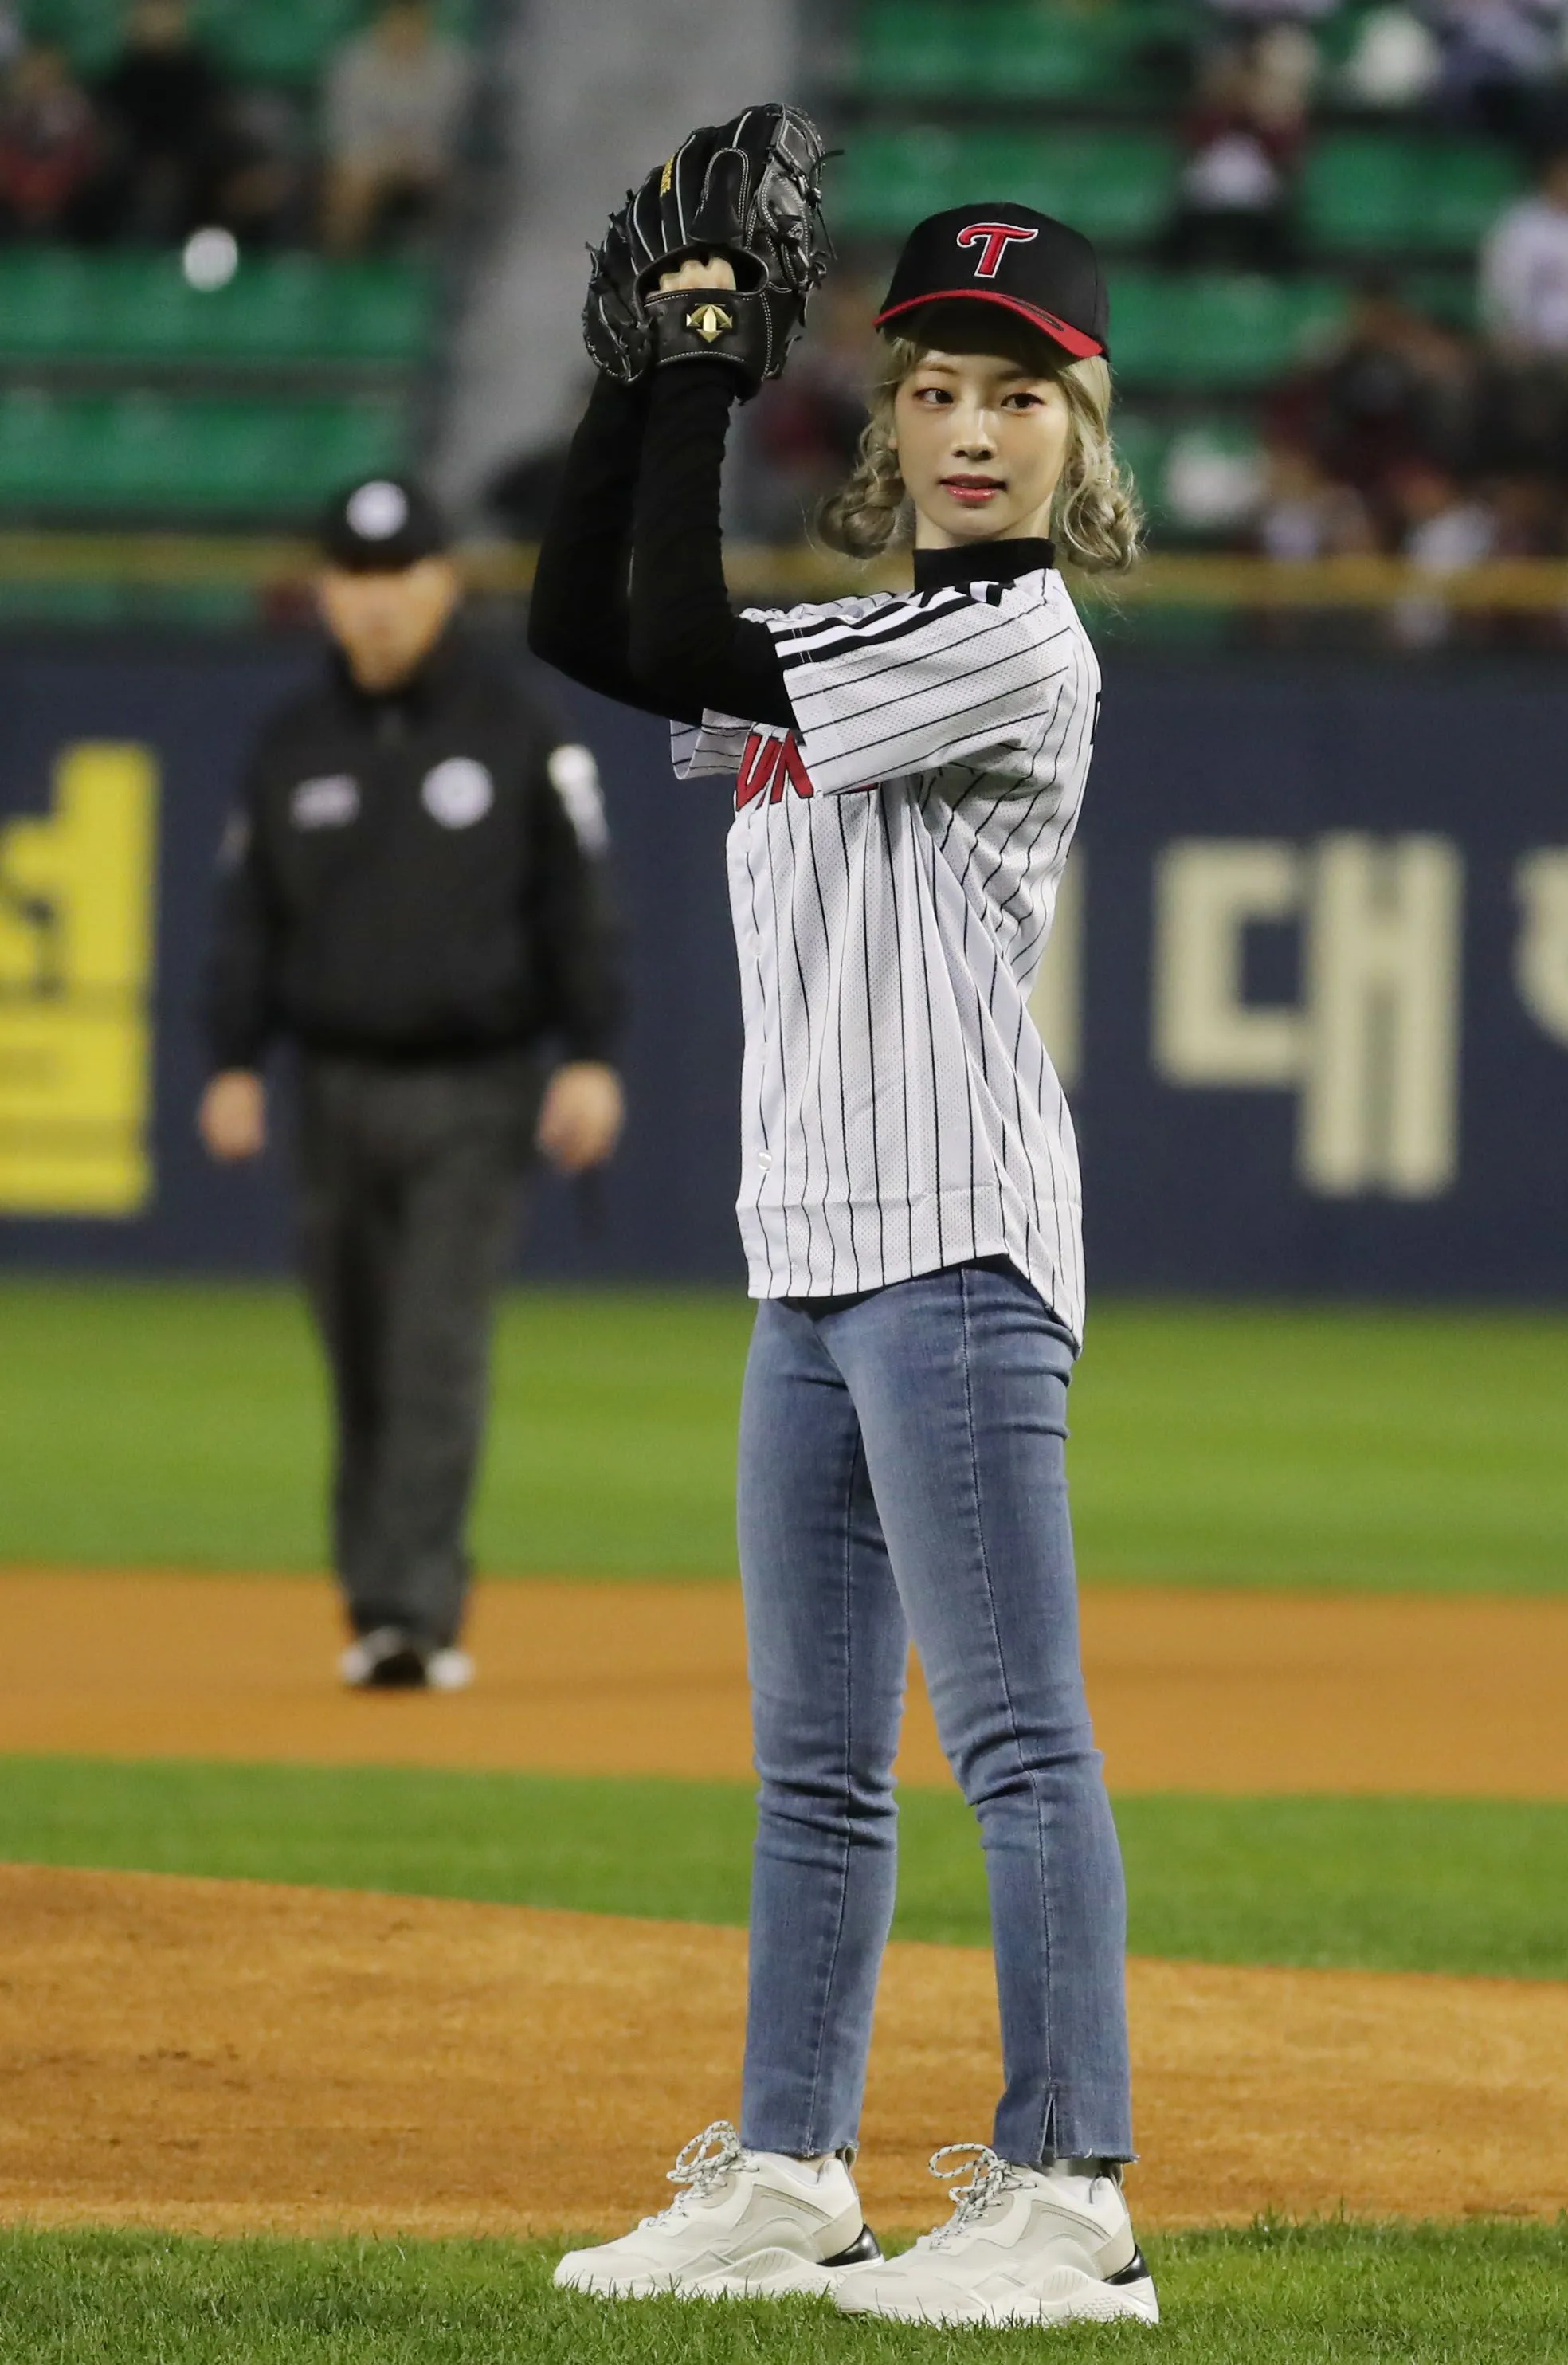 First Pitch at LG Twins game - Dahyun (TWICE) photo (43044154